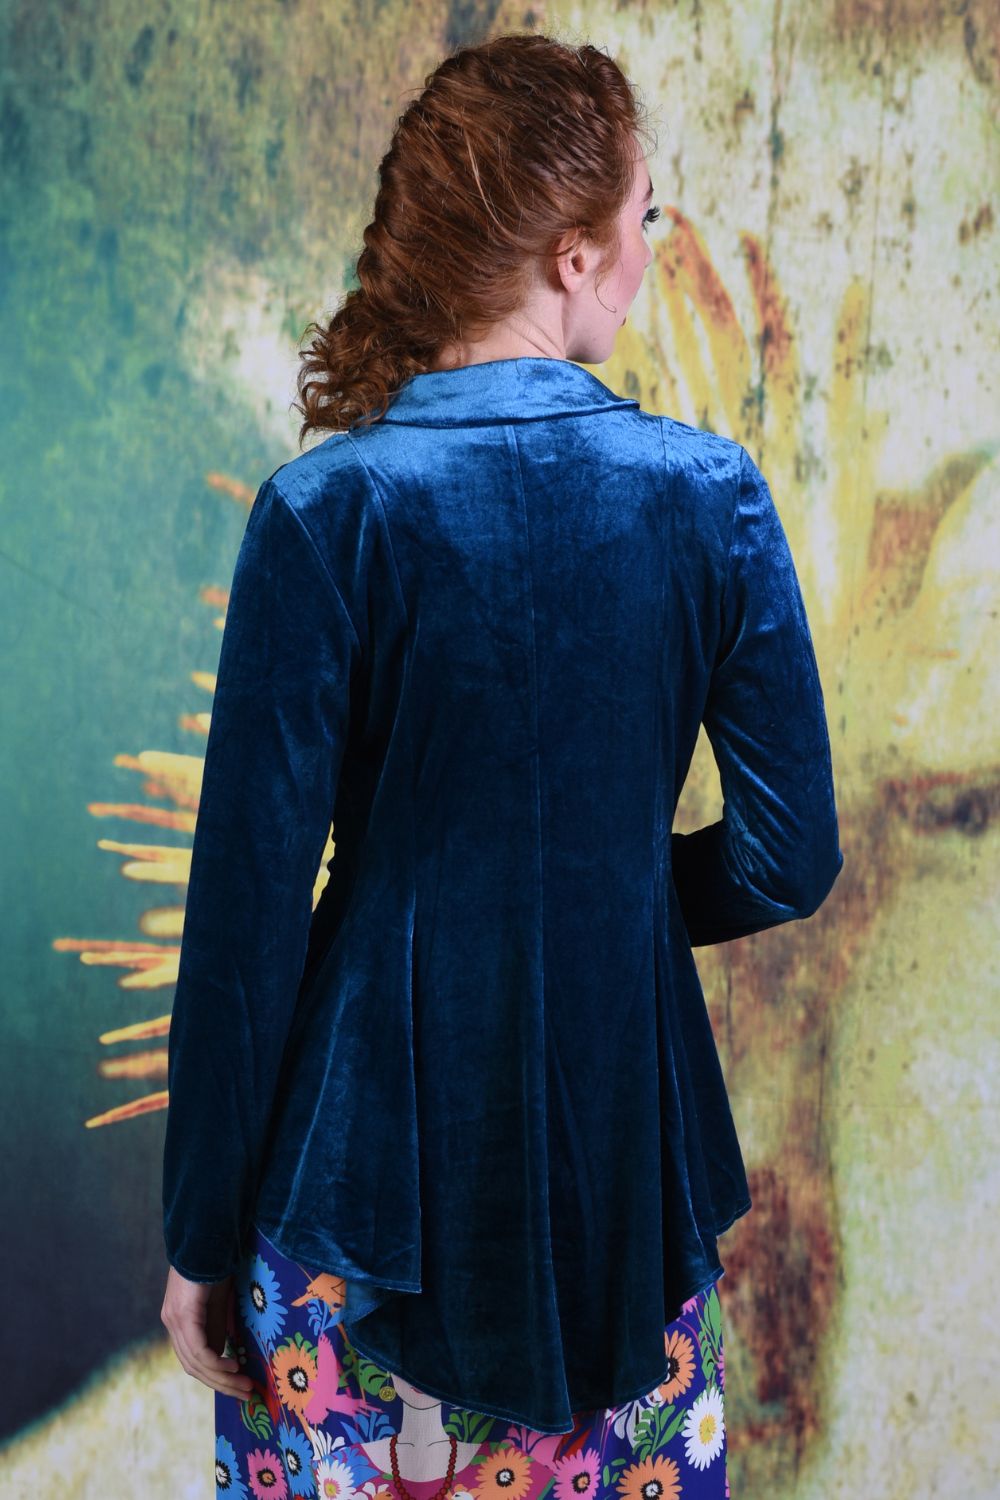 Back of model wearing the Annah Stretton Ady Grace jacket in teal